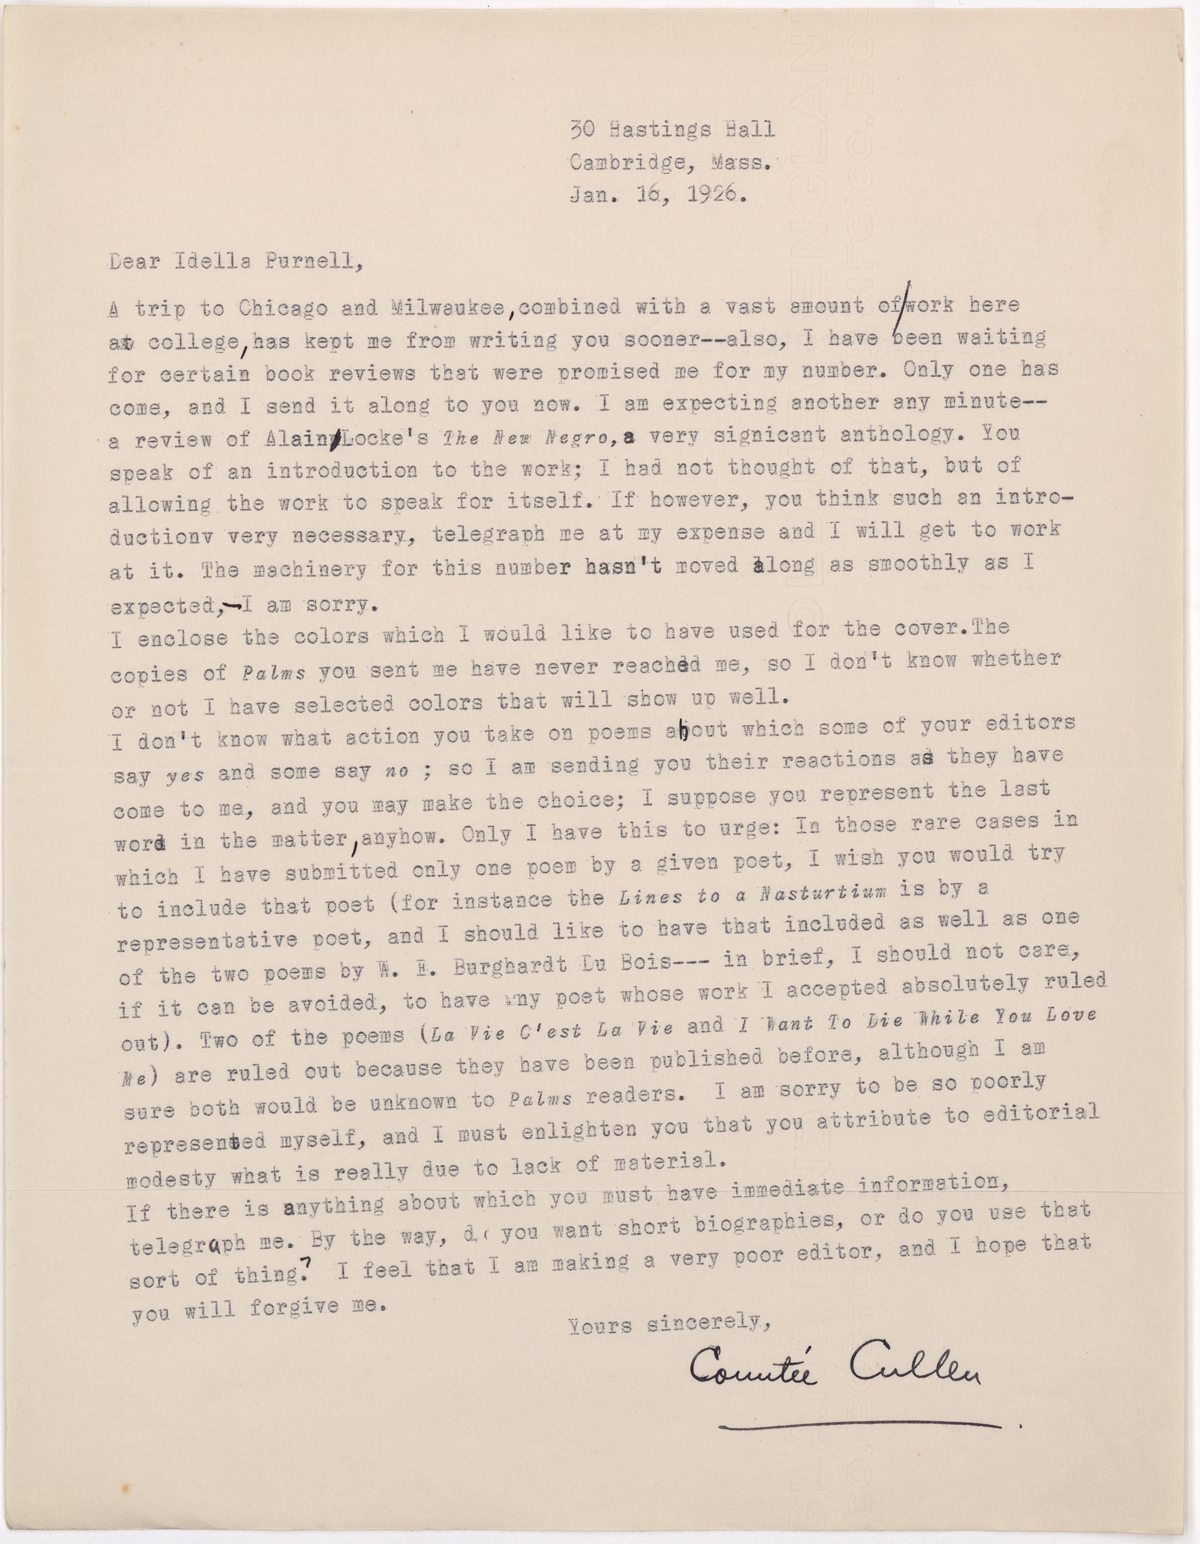 In this January 16, 1926 letter to Purnell, Cullen discusses his editorial work on Palms and expresses his wish that at least one poem from each of the poets he has recommended be included in the issue. Unfortunately, the colors he recommended for use on the cover are no longer enclosed in the letter. 